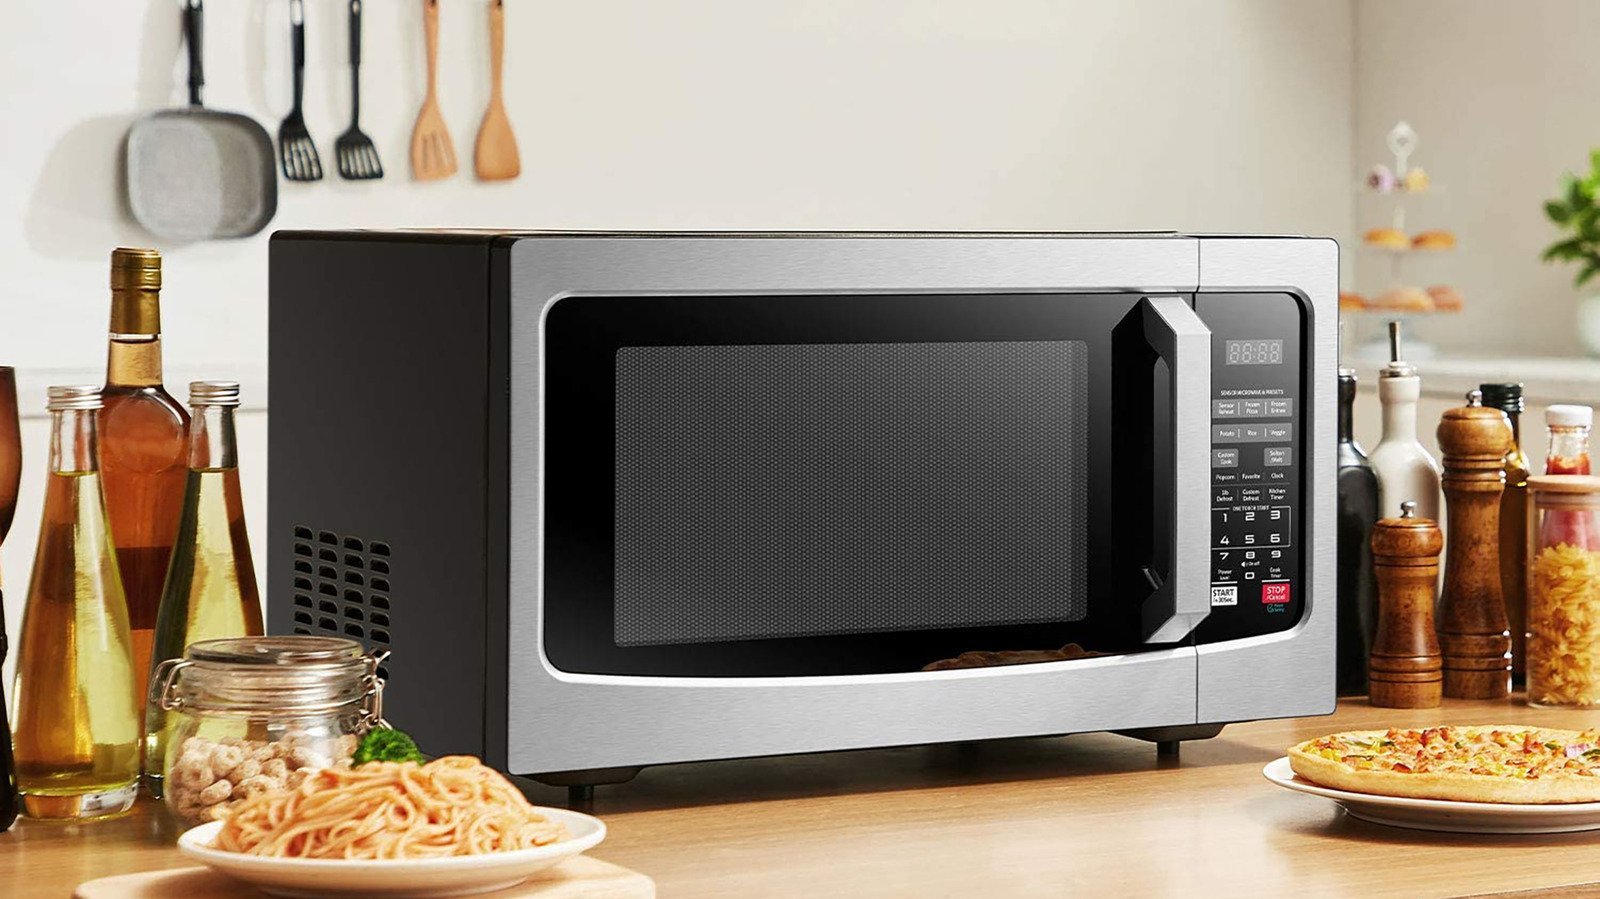 You Probably Didn't Know The Microwave In Your Home Can Do This